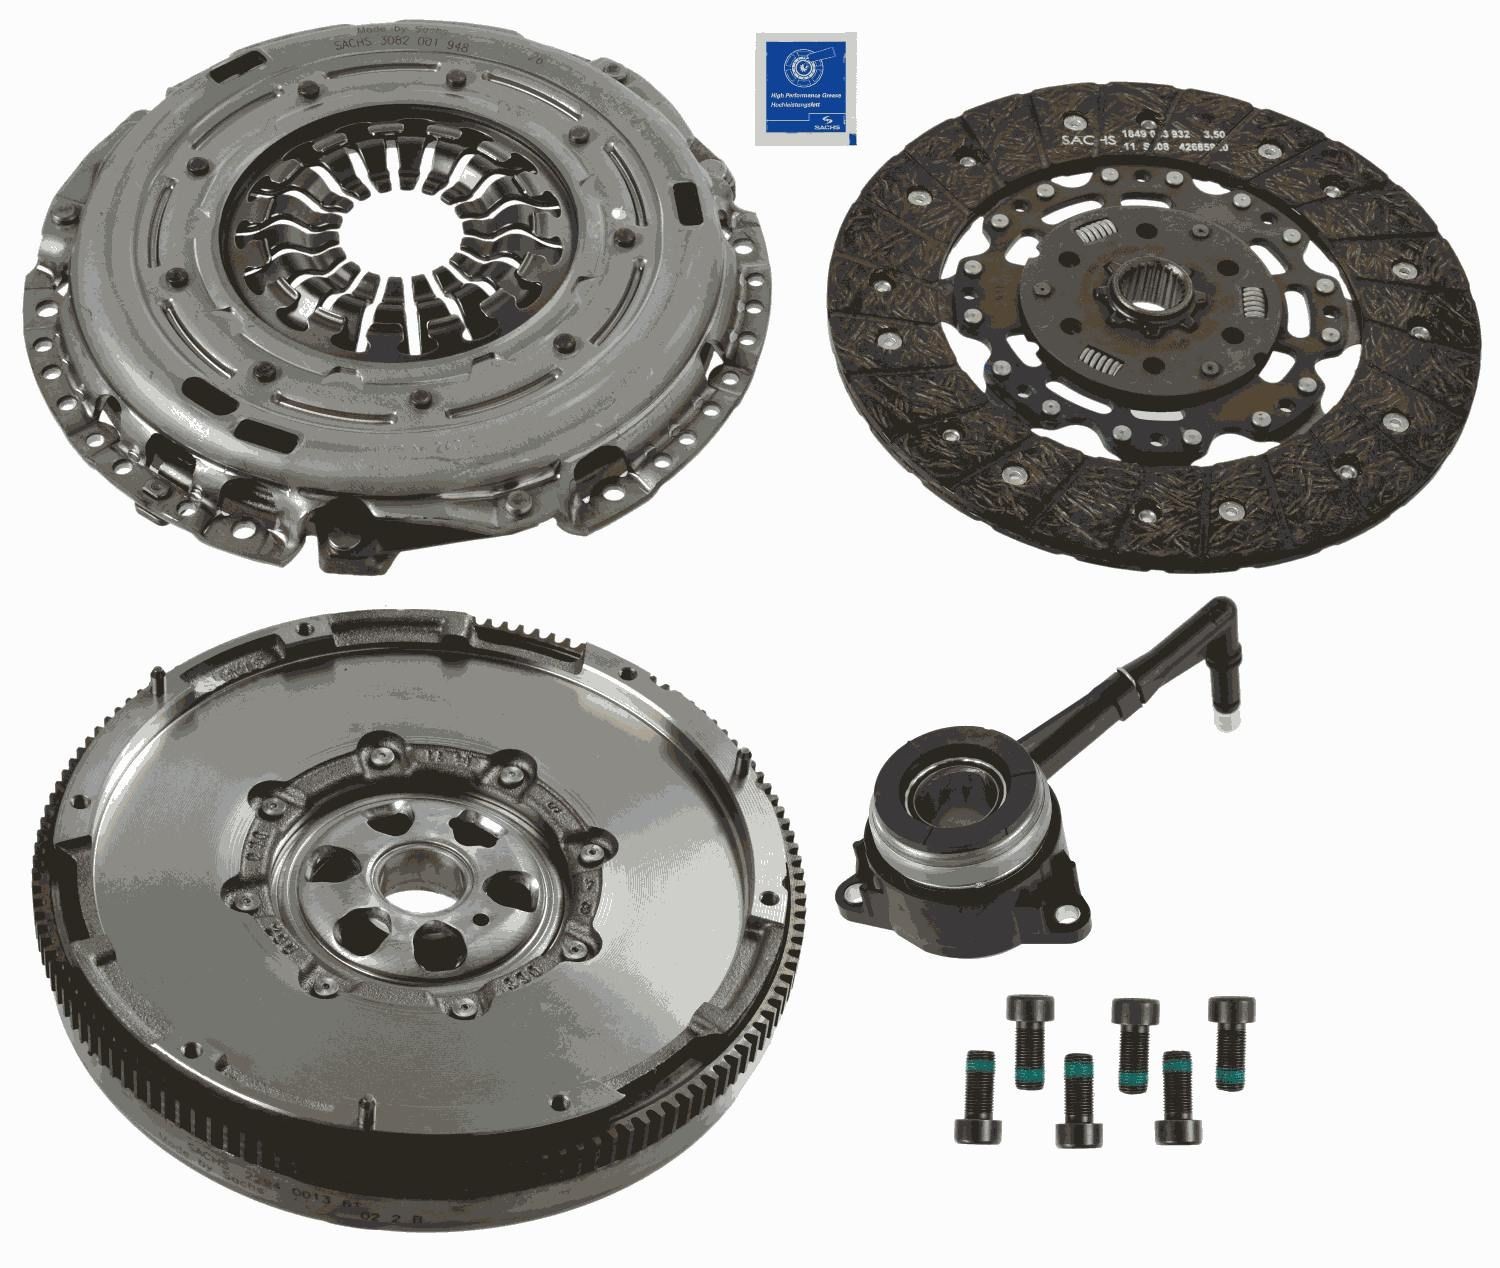 SACHS 2290 601 145 Clutch kit with central slave cylinder, with clutch pressure plate, with dual-mass flywheel, with flywheel screws, with clutch disc, 240mm